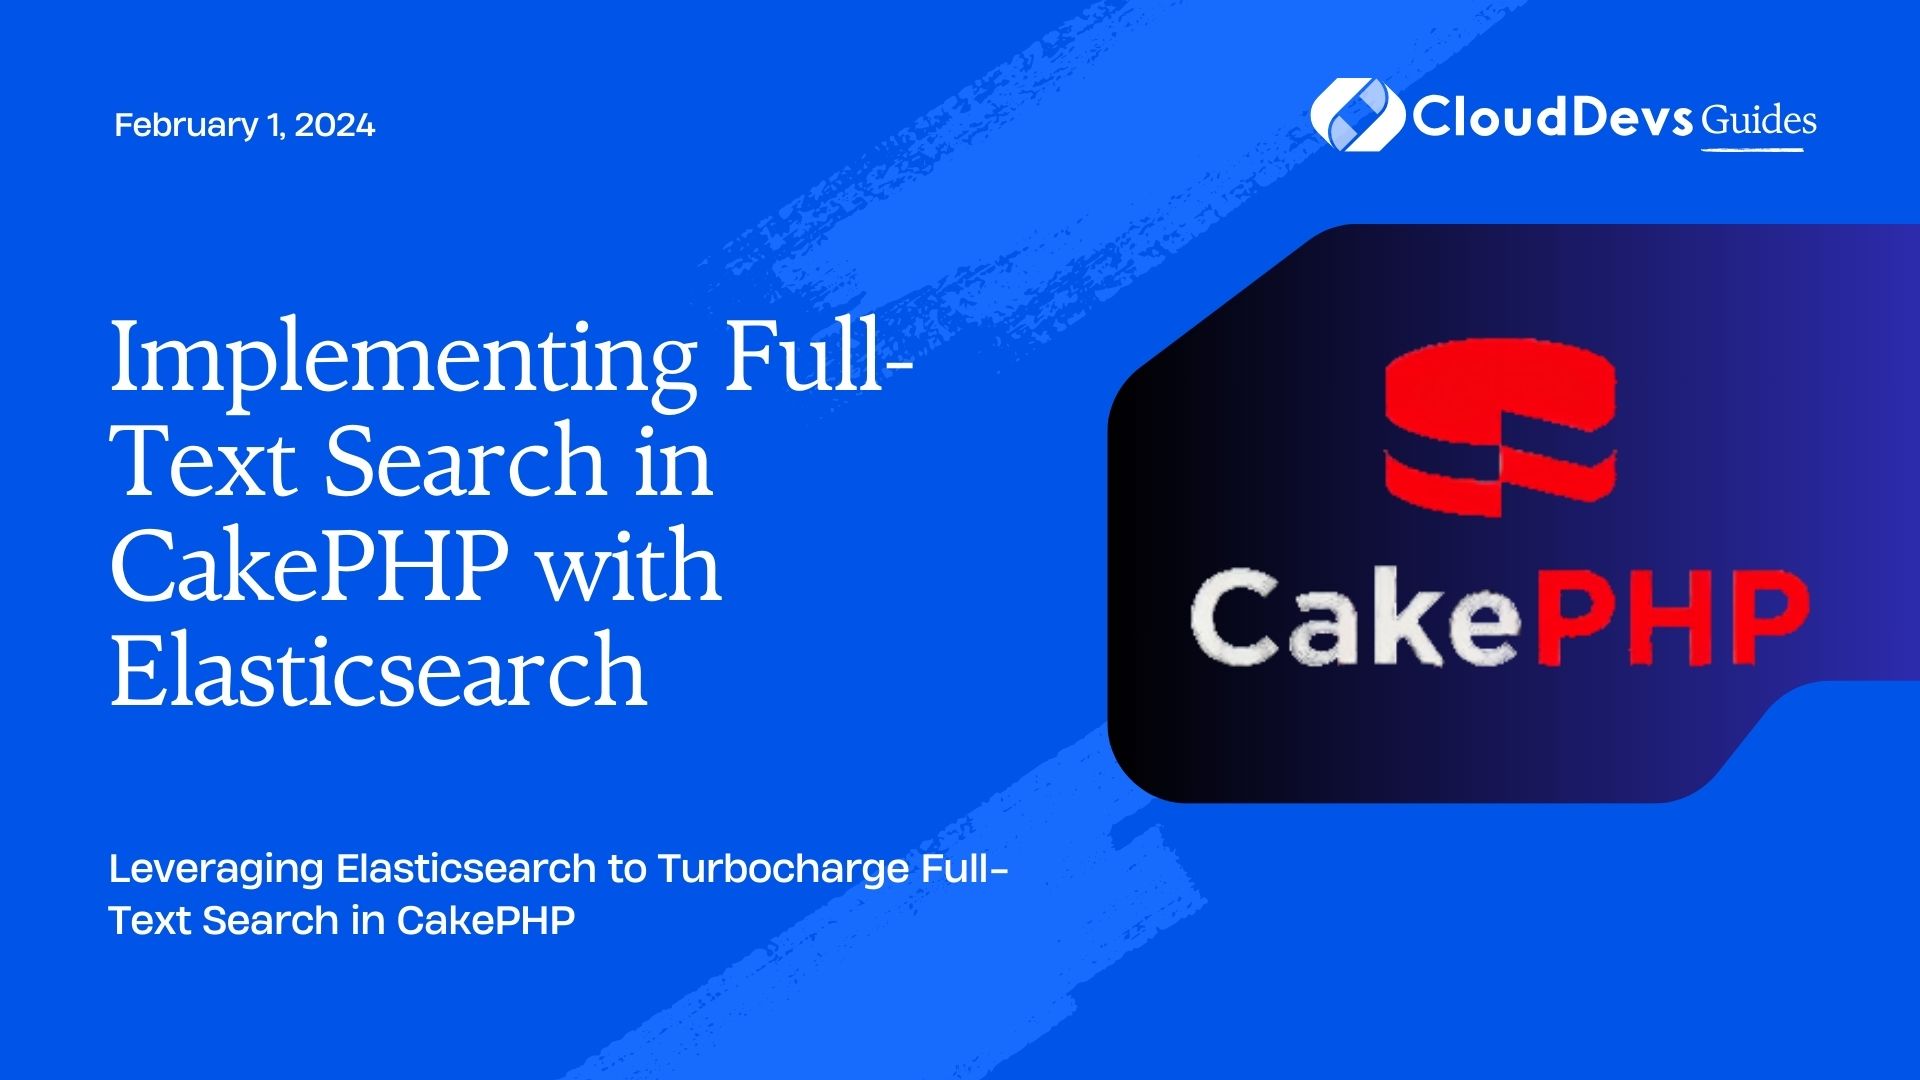 Implementing Full-Text Search in CakePHP with Elasticsearch